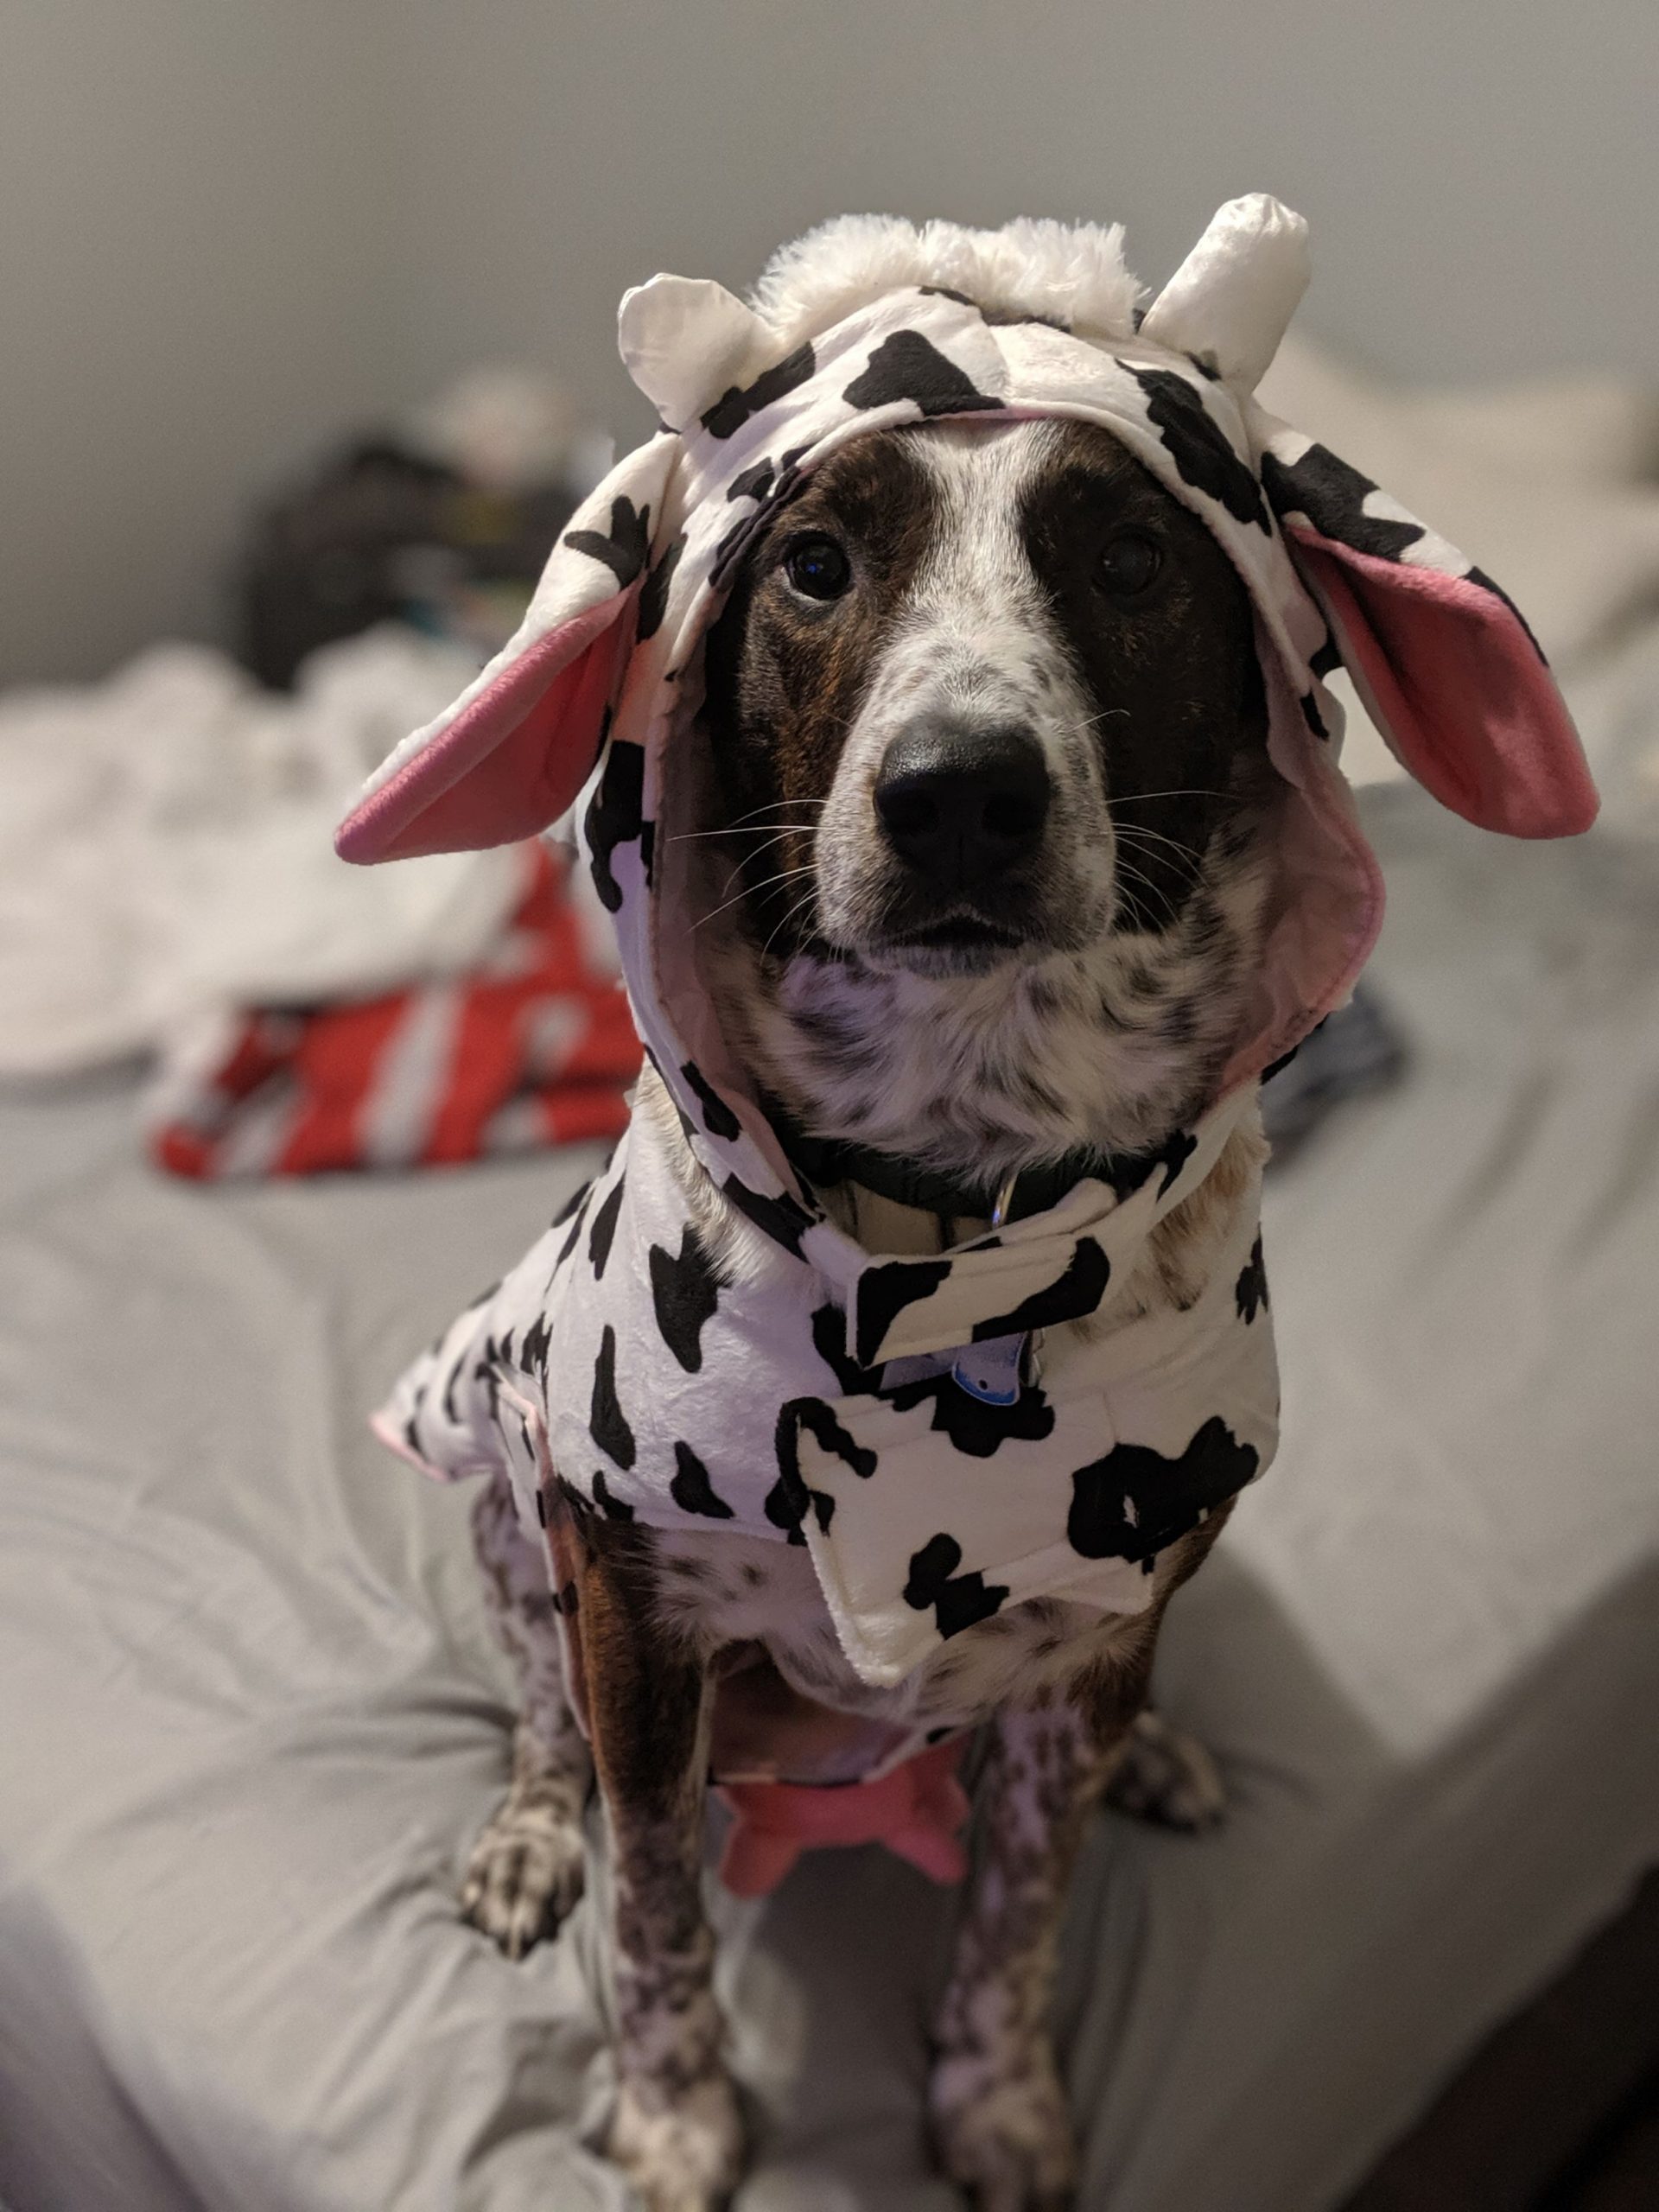 Cash in a cow costume